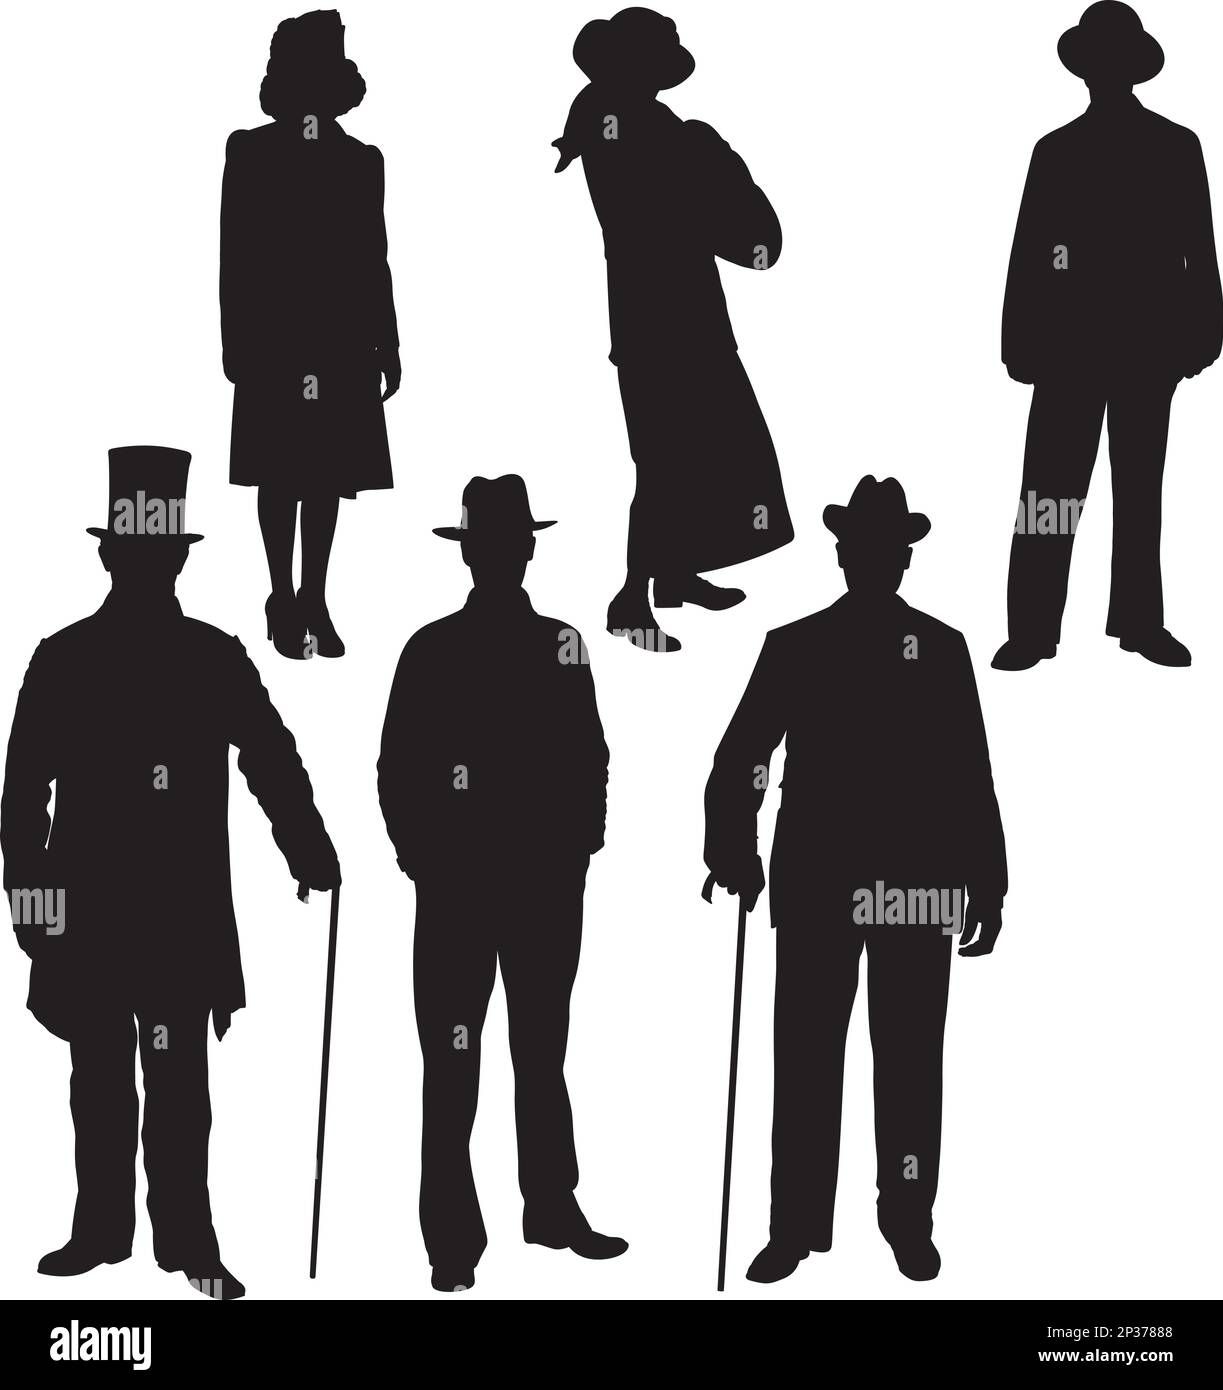 Gentleman and lady silhouettes isolated. Layered and fully editable Stock Vector